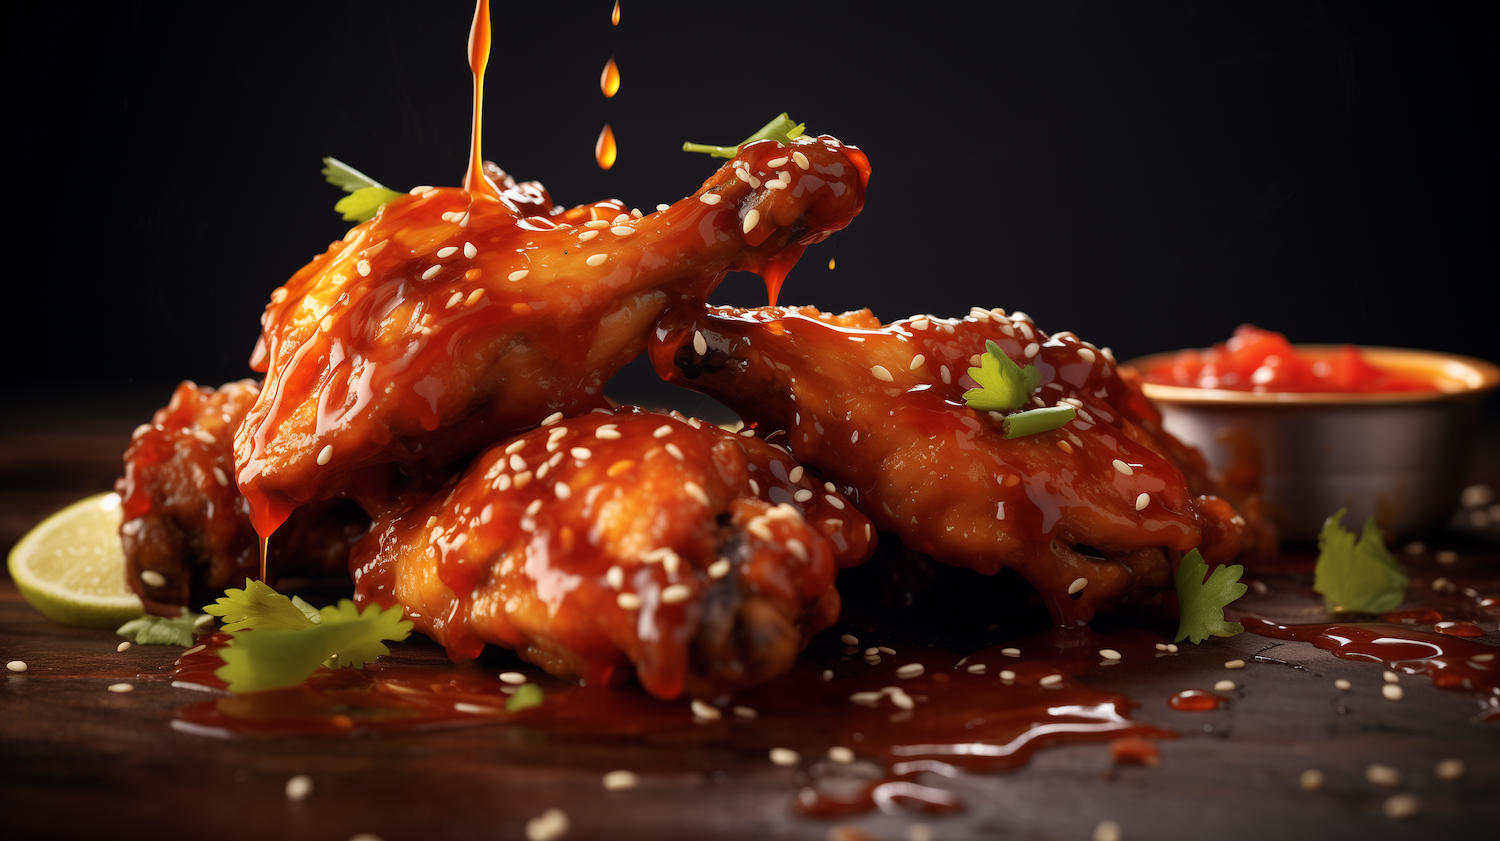 Oven-Baked Chicken Wings with Hot Honey Sriracha Sauce